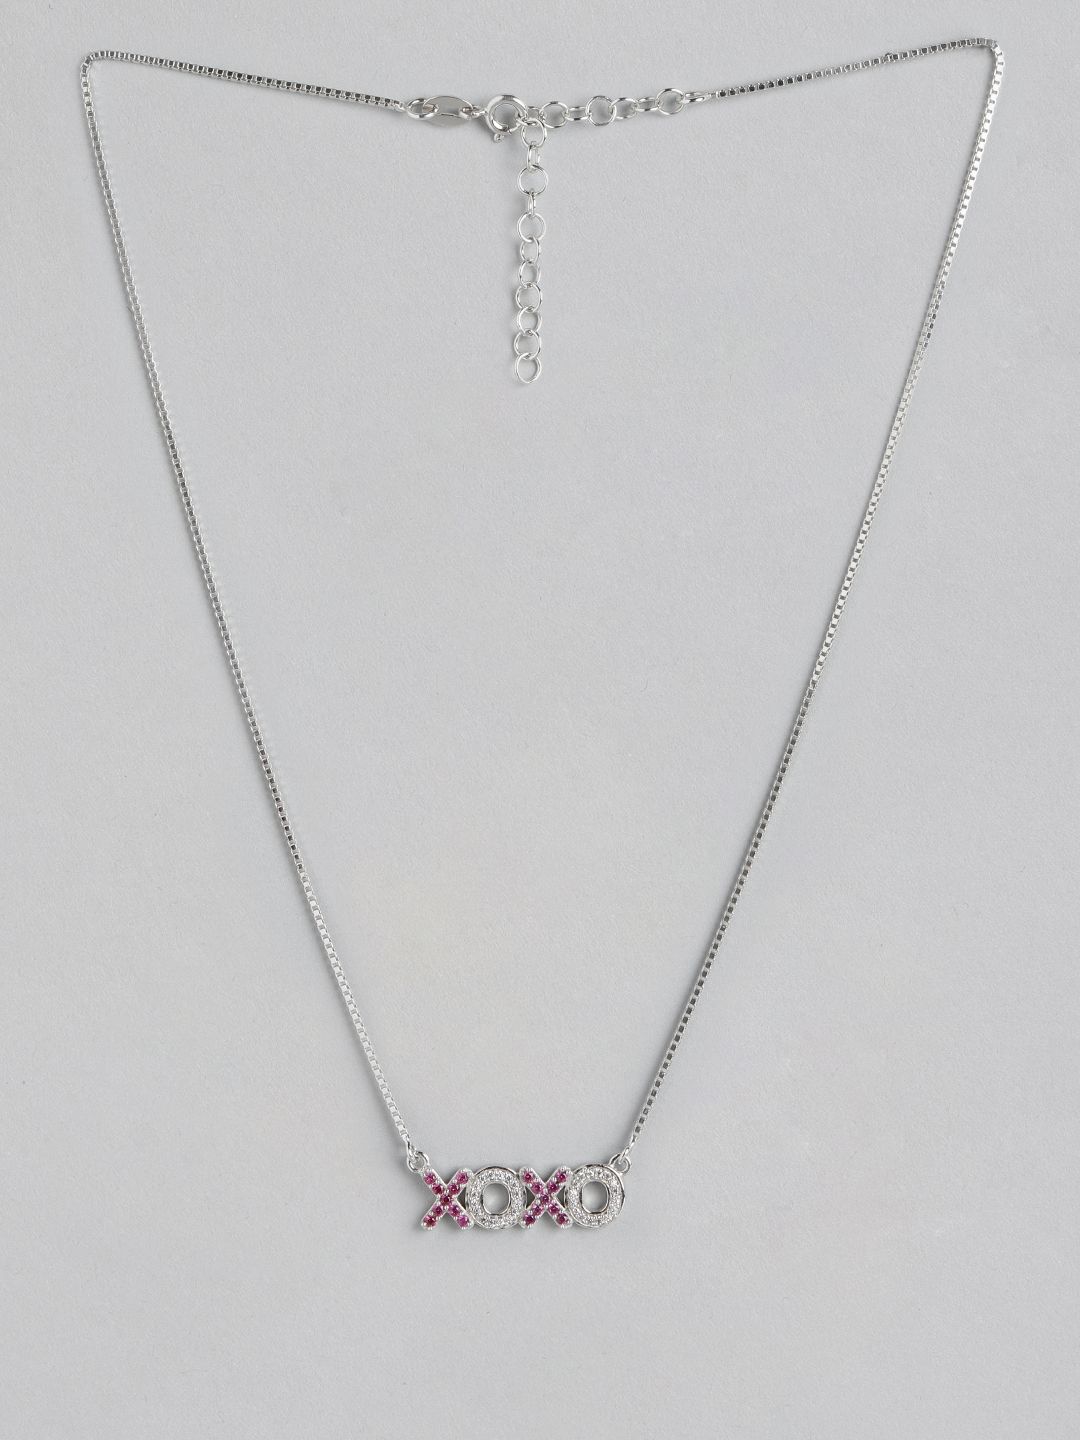 Carlton London Silver-Toned & Pink Rhodium-Plated CZ Studded Link Necklace Price in India